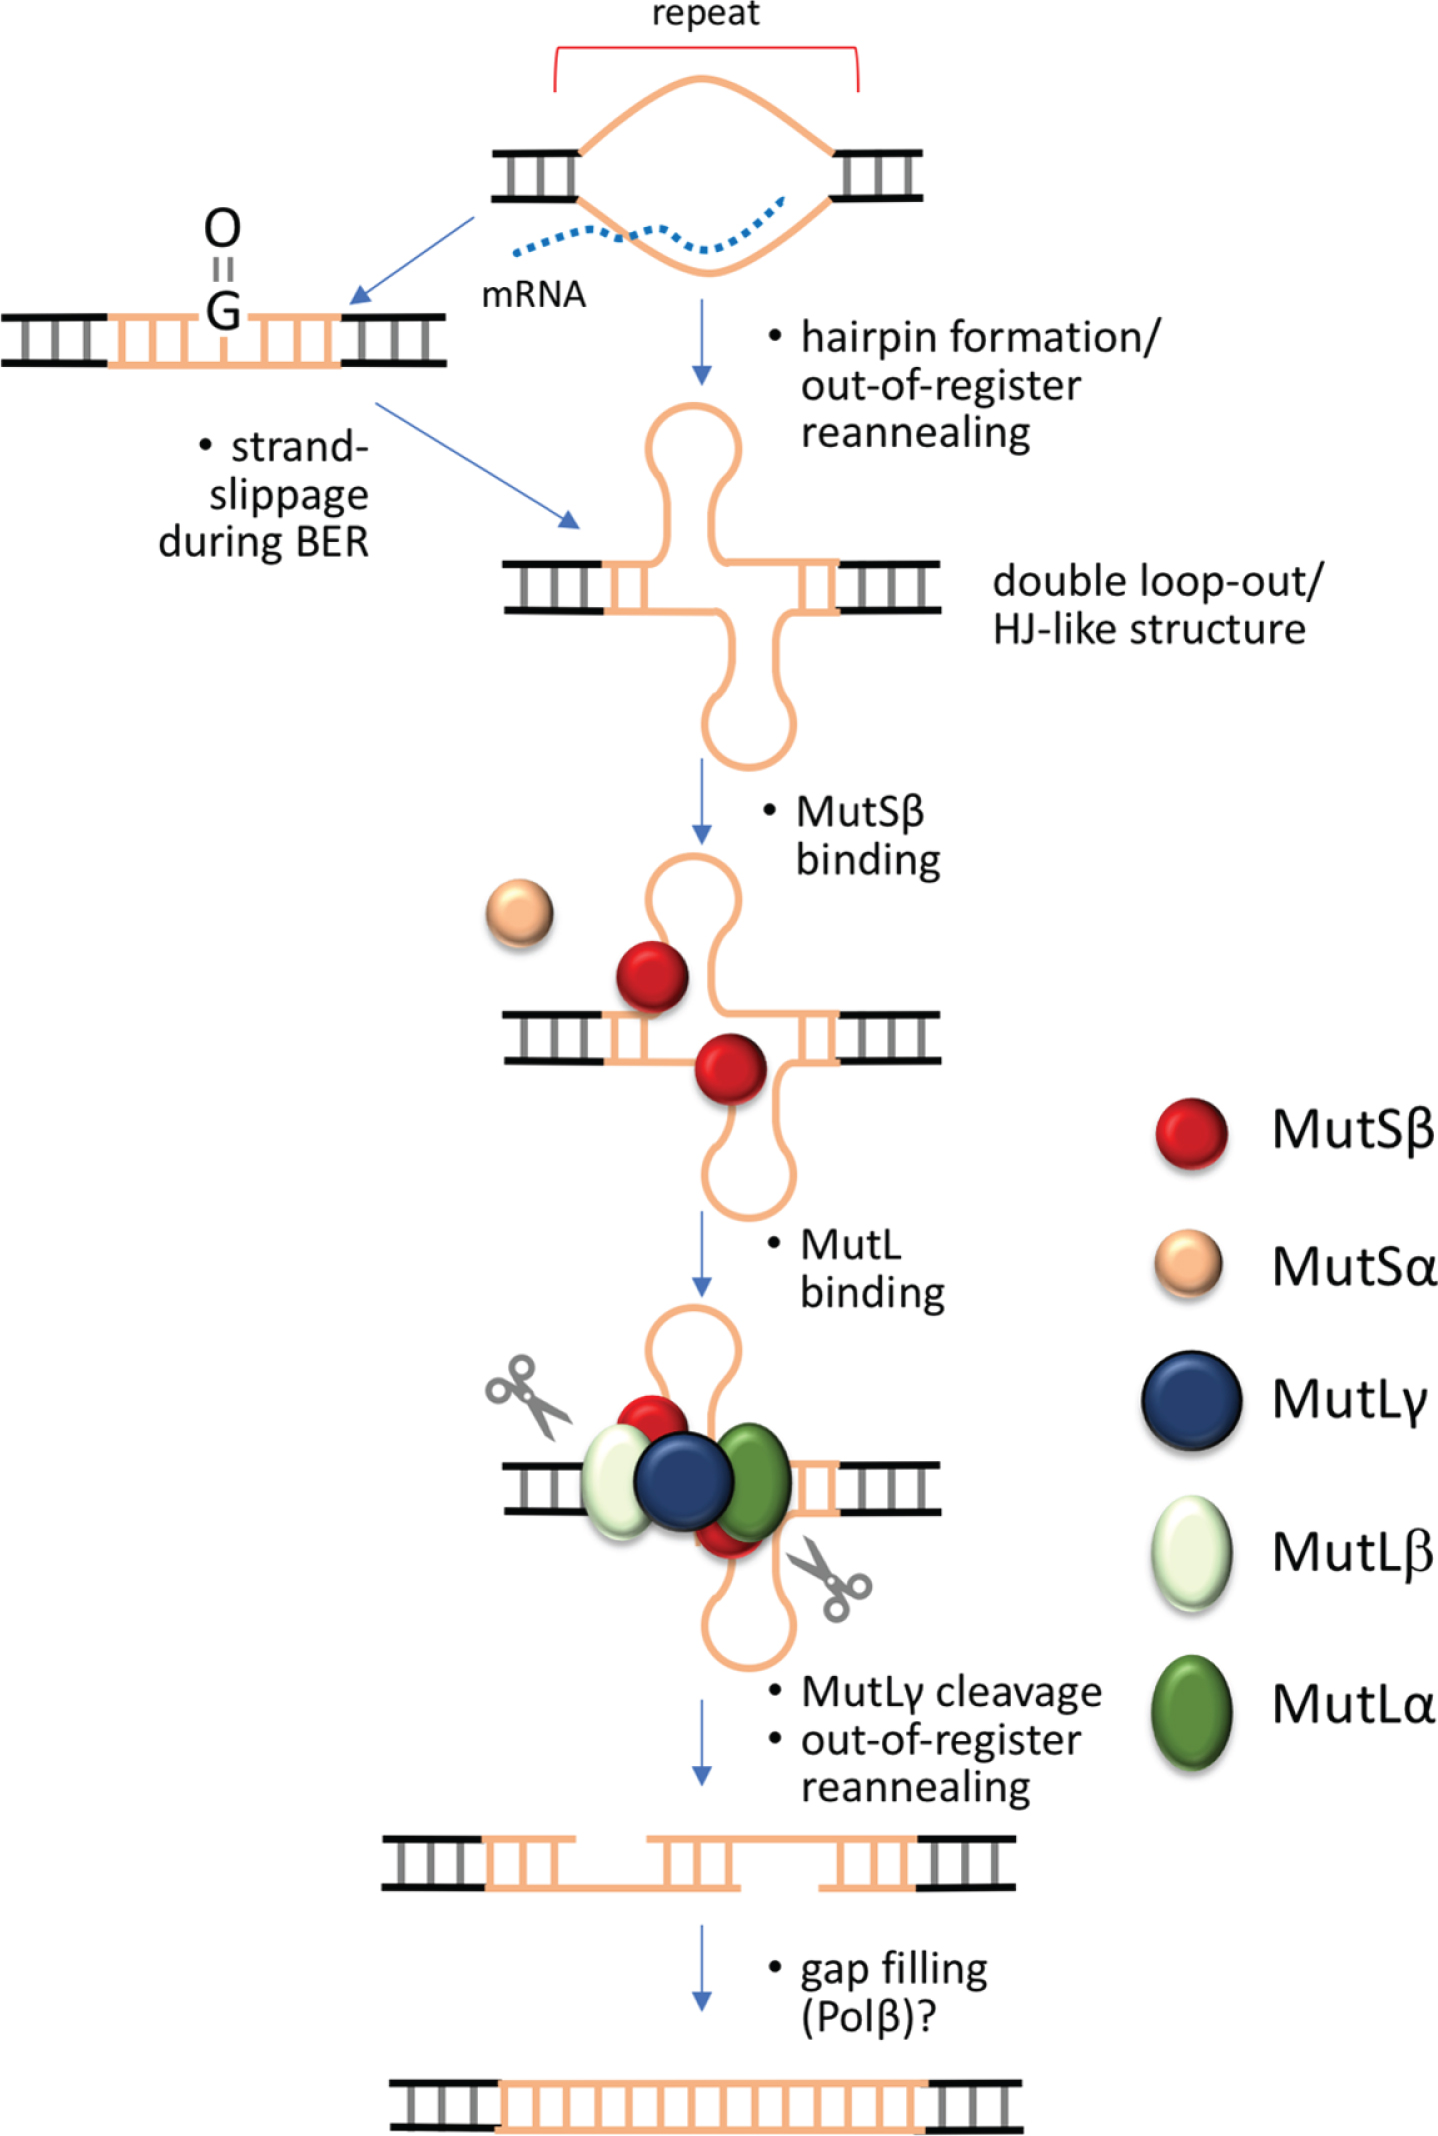 Double-strand break model for the generation of repeat expansions. Expansion in this model is initiated when the repeat is transiently unpaired, as for example during transcription, replication or DNA damage repair. Out-of-register annealing of the two strands during this process could result in a double loop-out structure that resembles a Holliday Junction, the normal MutLγ meiotic substrate. This process may be exacerbated by the ability of the individual strands of some repeats to form stable intrastrand secondary structures like hairpins. Cleavage by MutLγ on either side of the double loop-out results in a double-strand break that can anneal out of register. Simple gap filling and ligation then results in expansions.